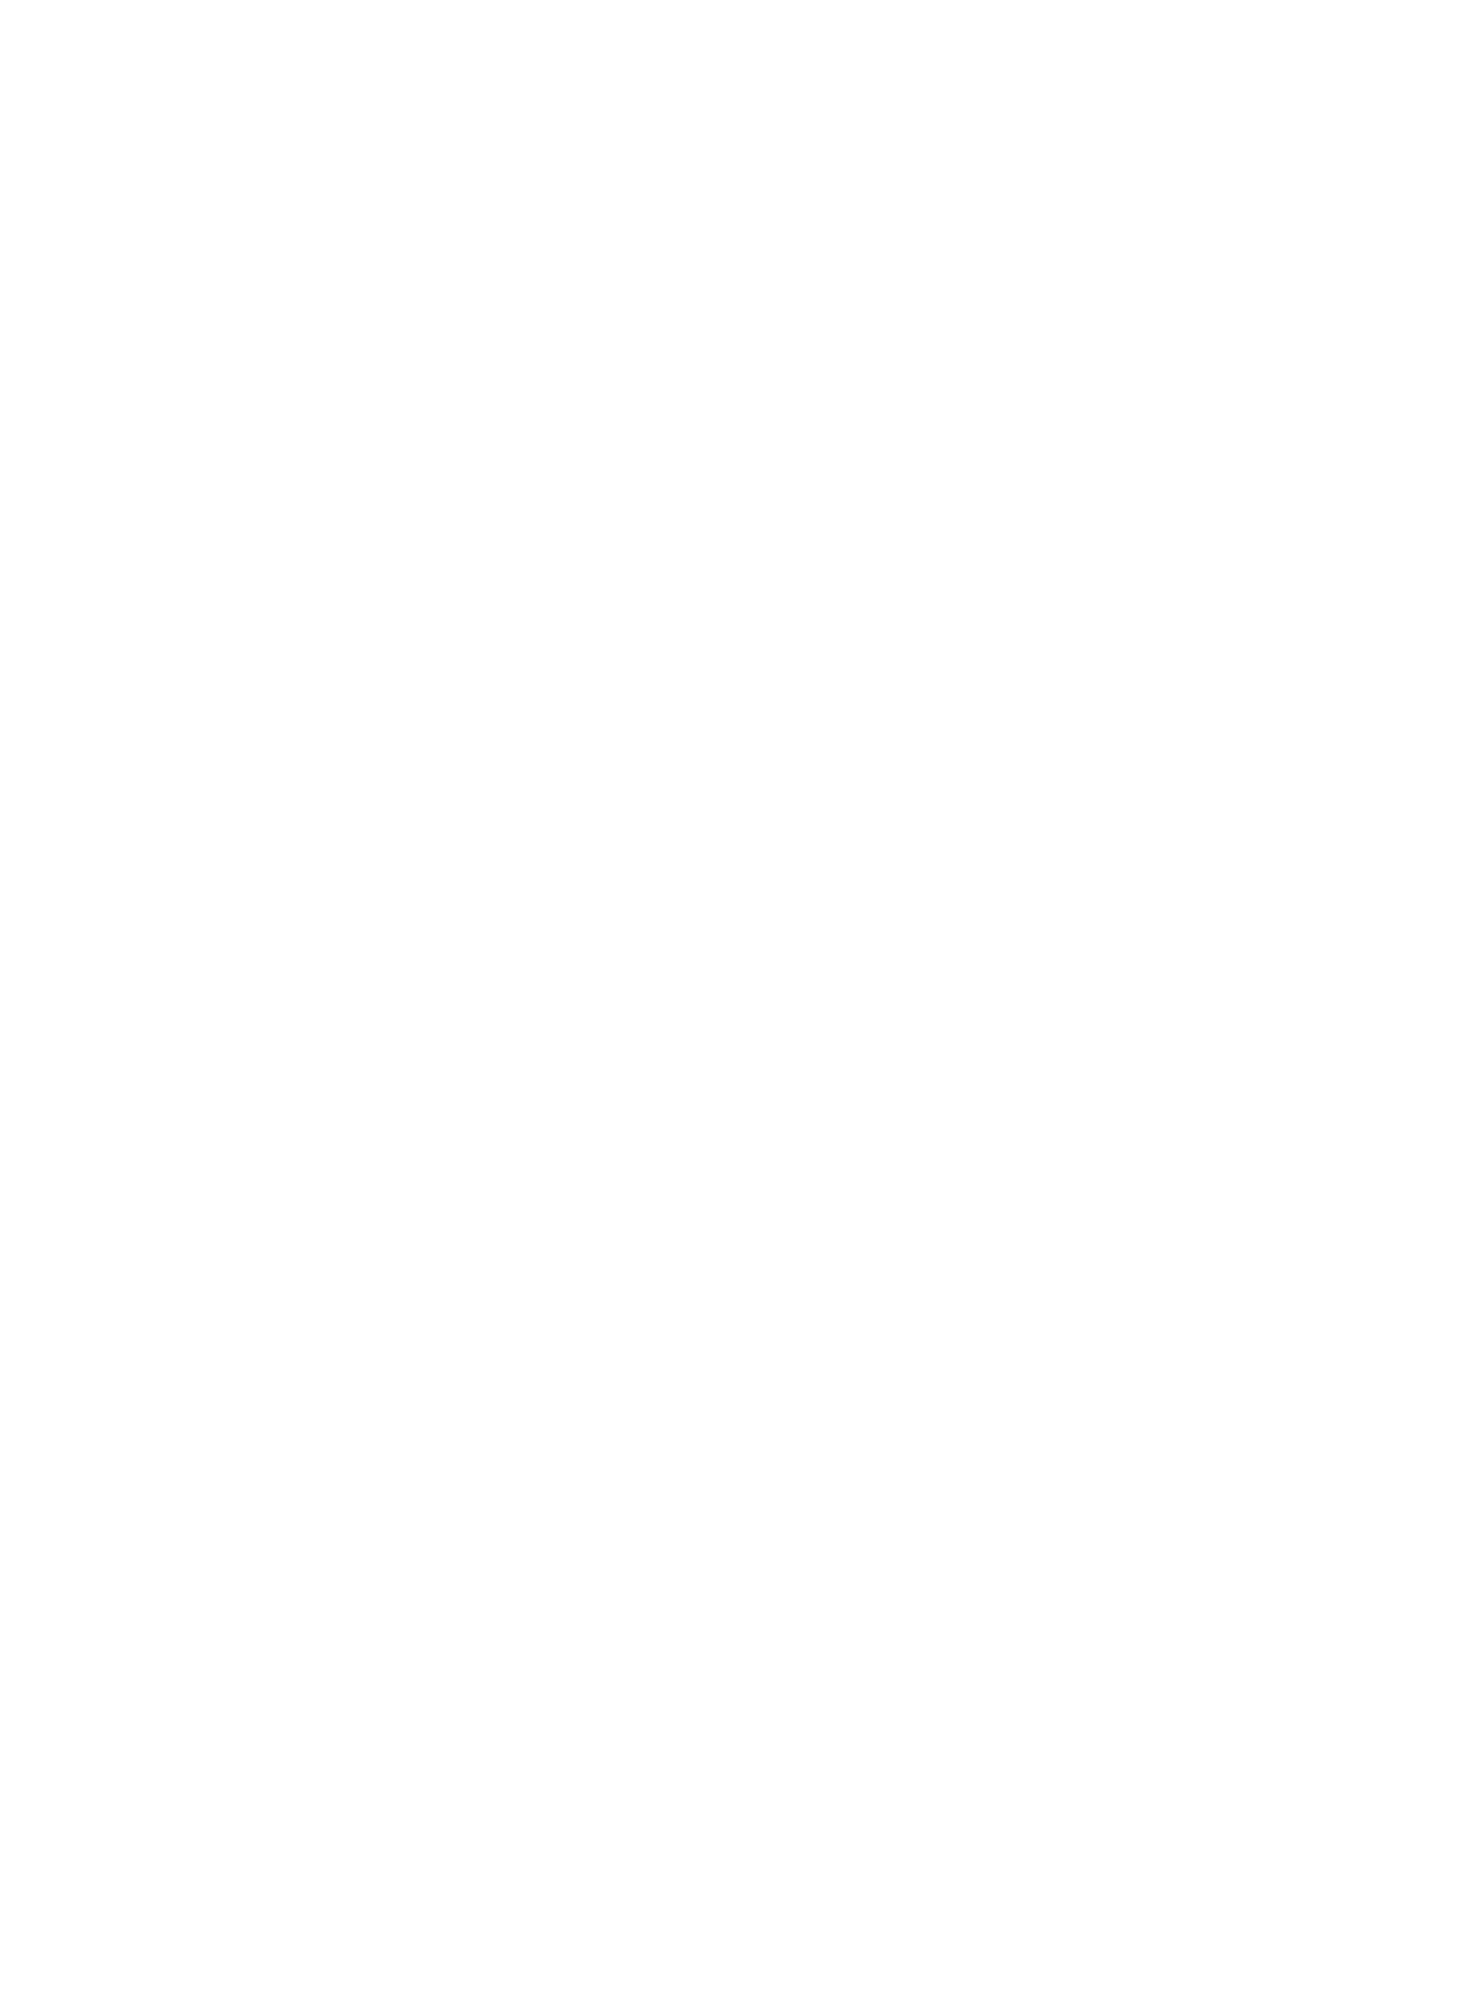 White outline of a magnifying glass with the text Spherion Direct below it